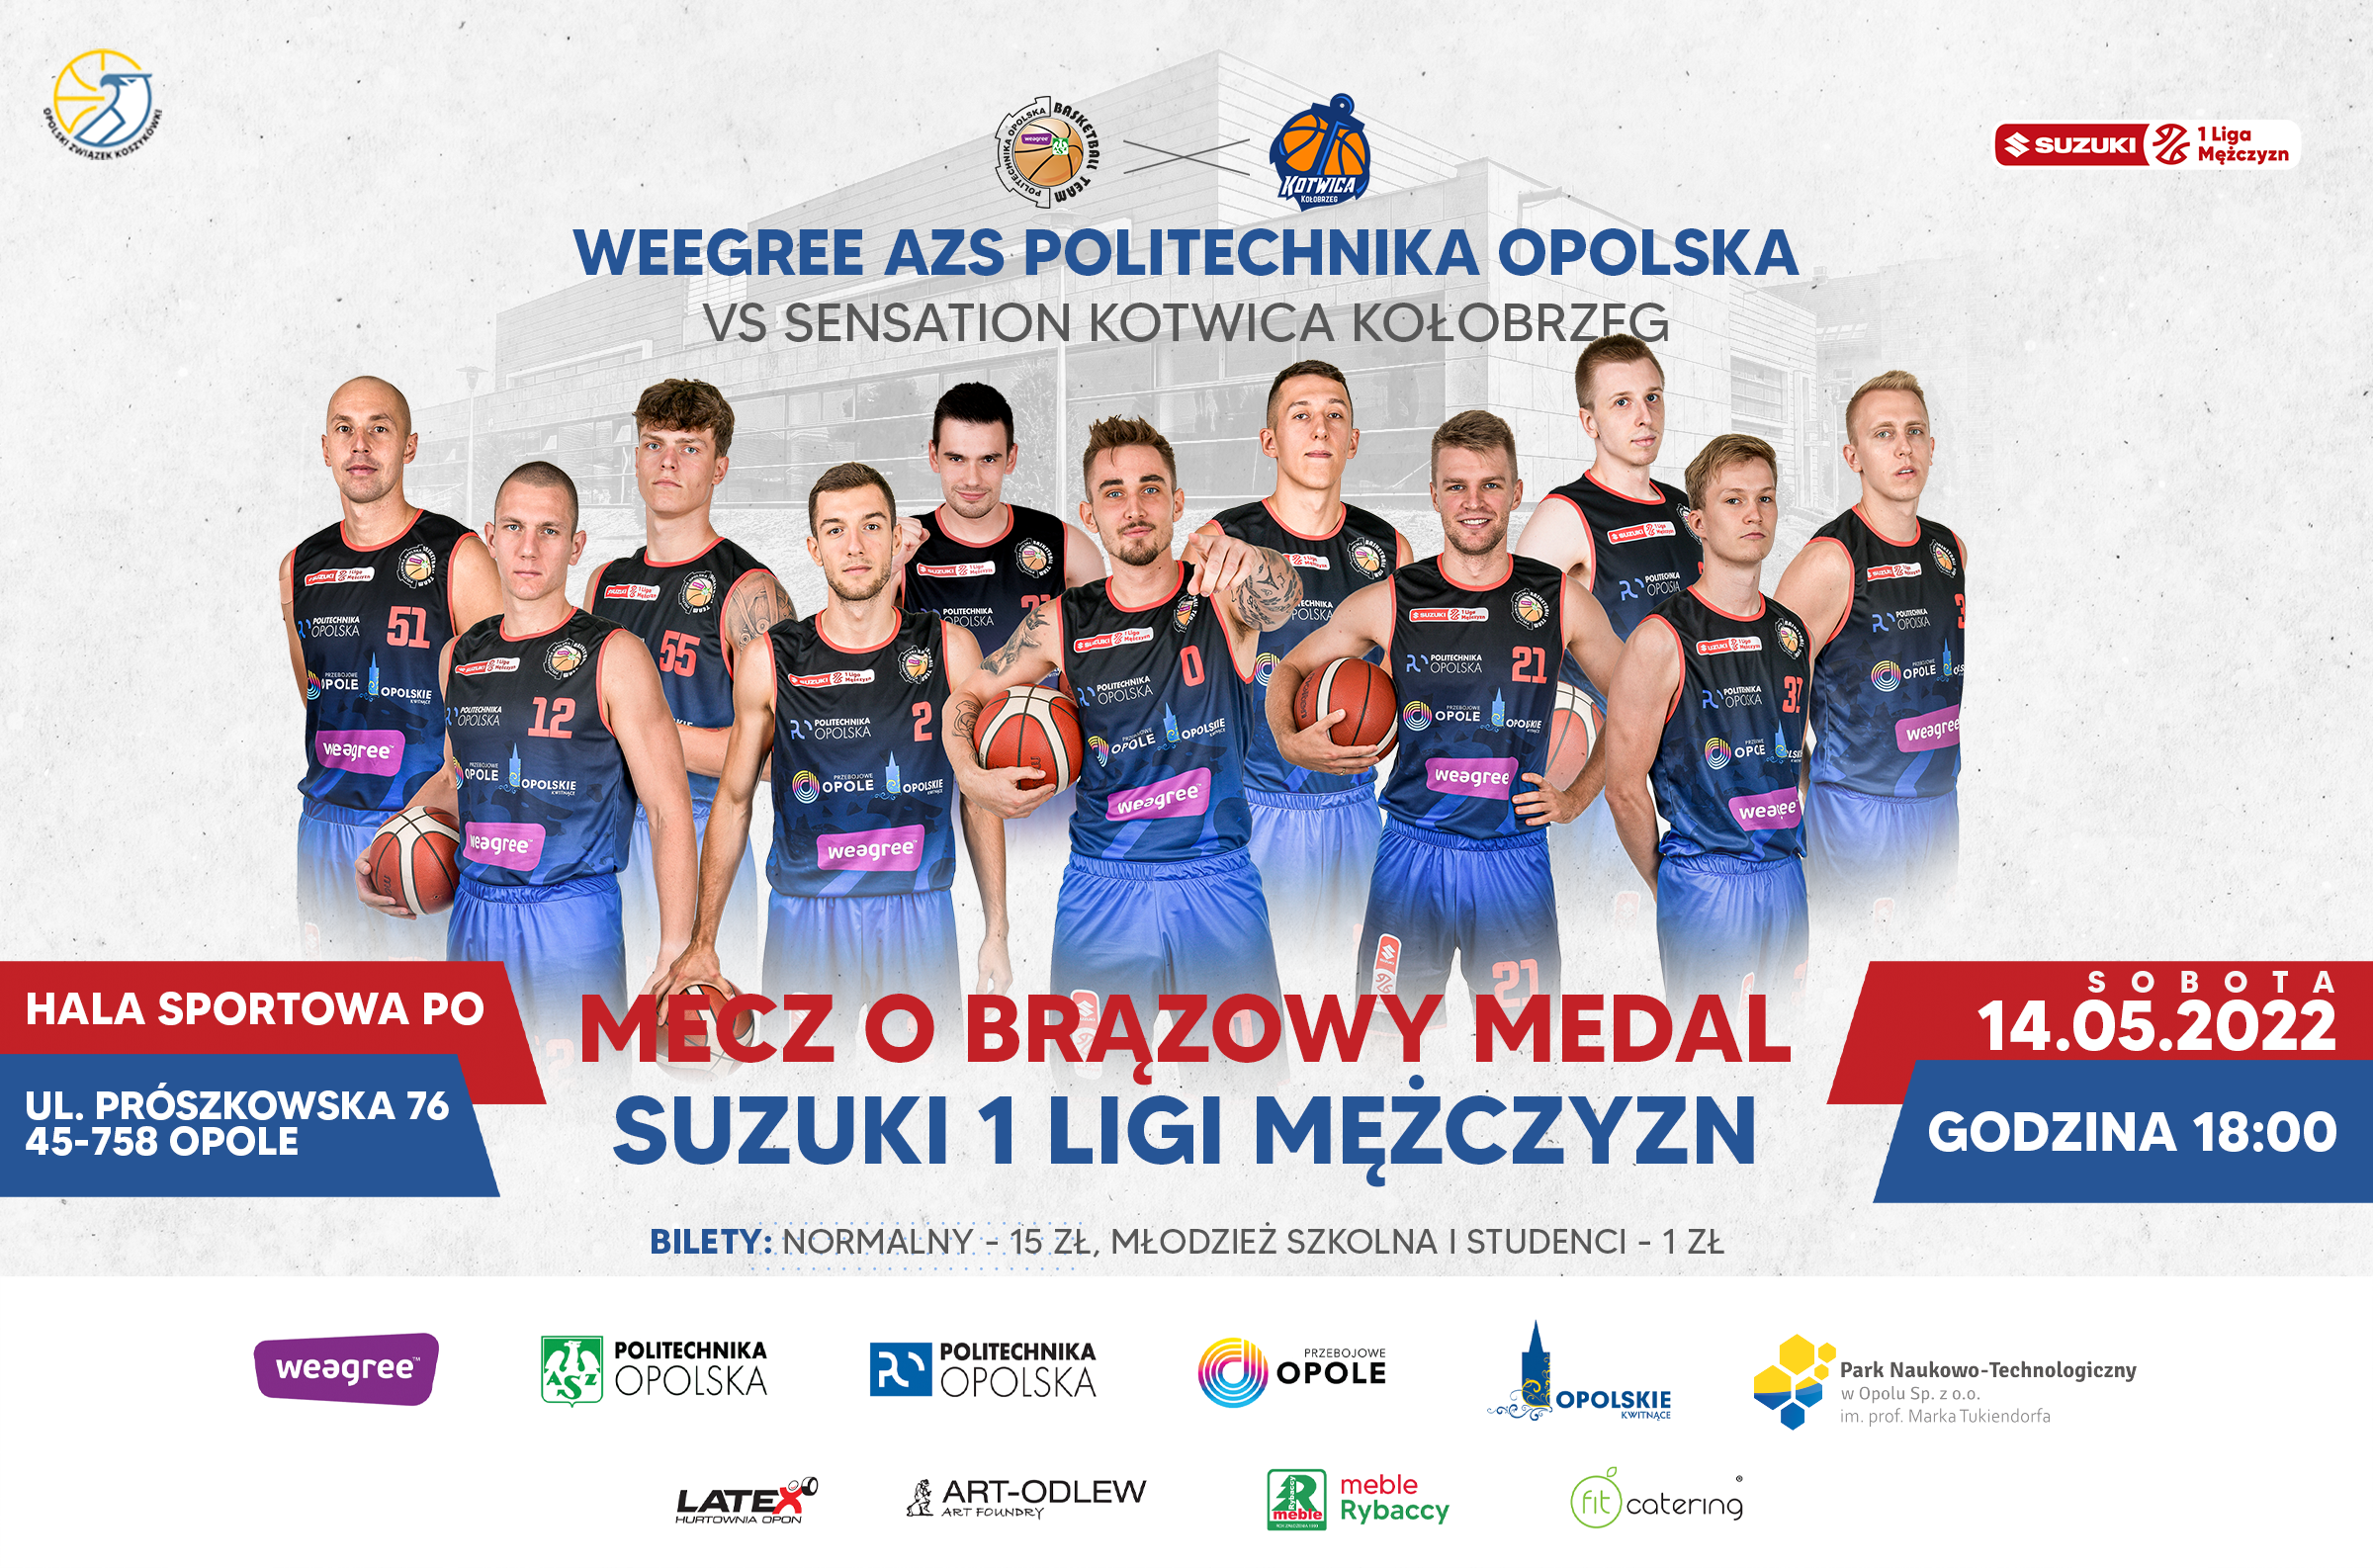 ART-ODLEW IS A SPONSOR OF THE OPOLE BASKETBALL TEAM